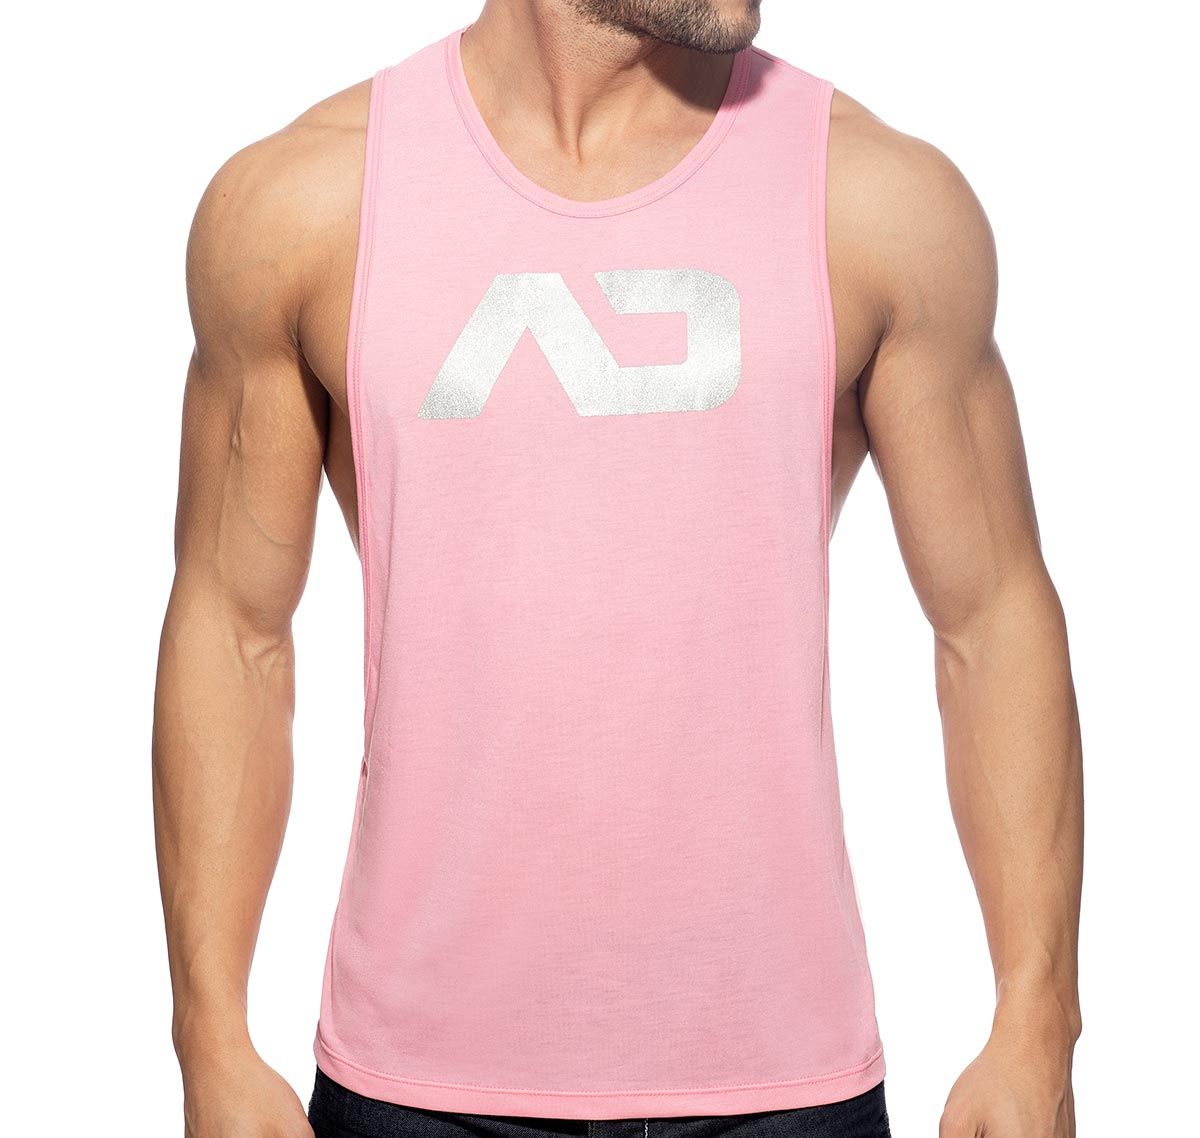 Addicted Tank Top AD LOW RIDER AD043, roze